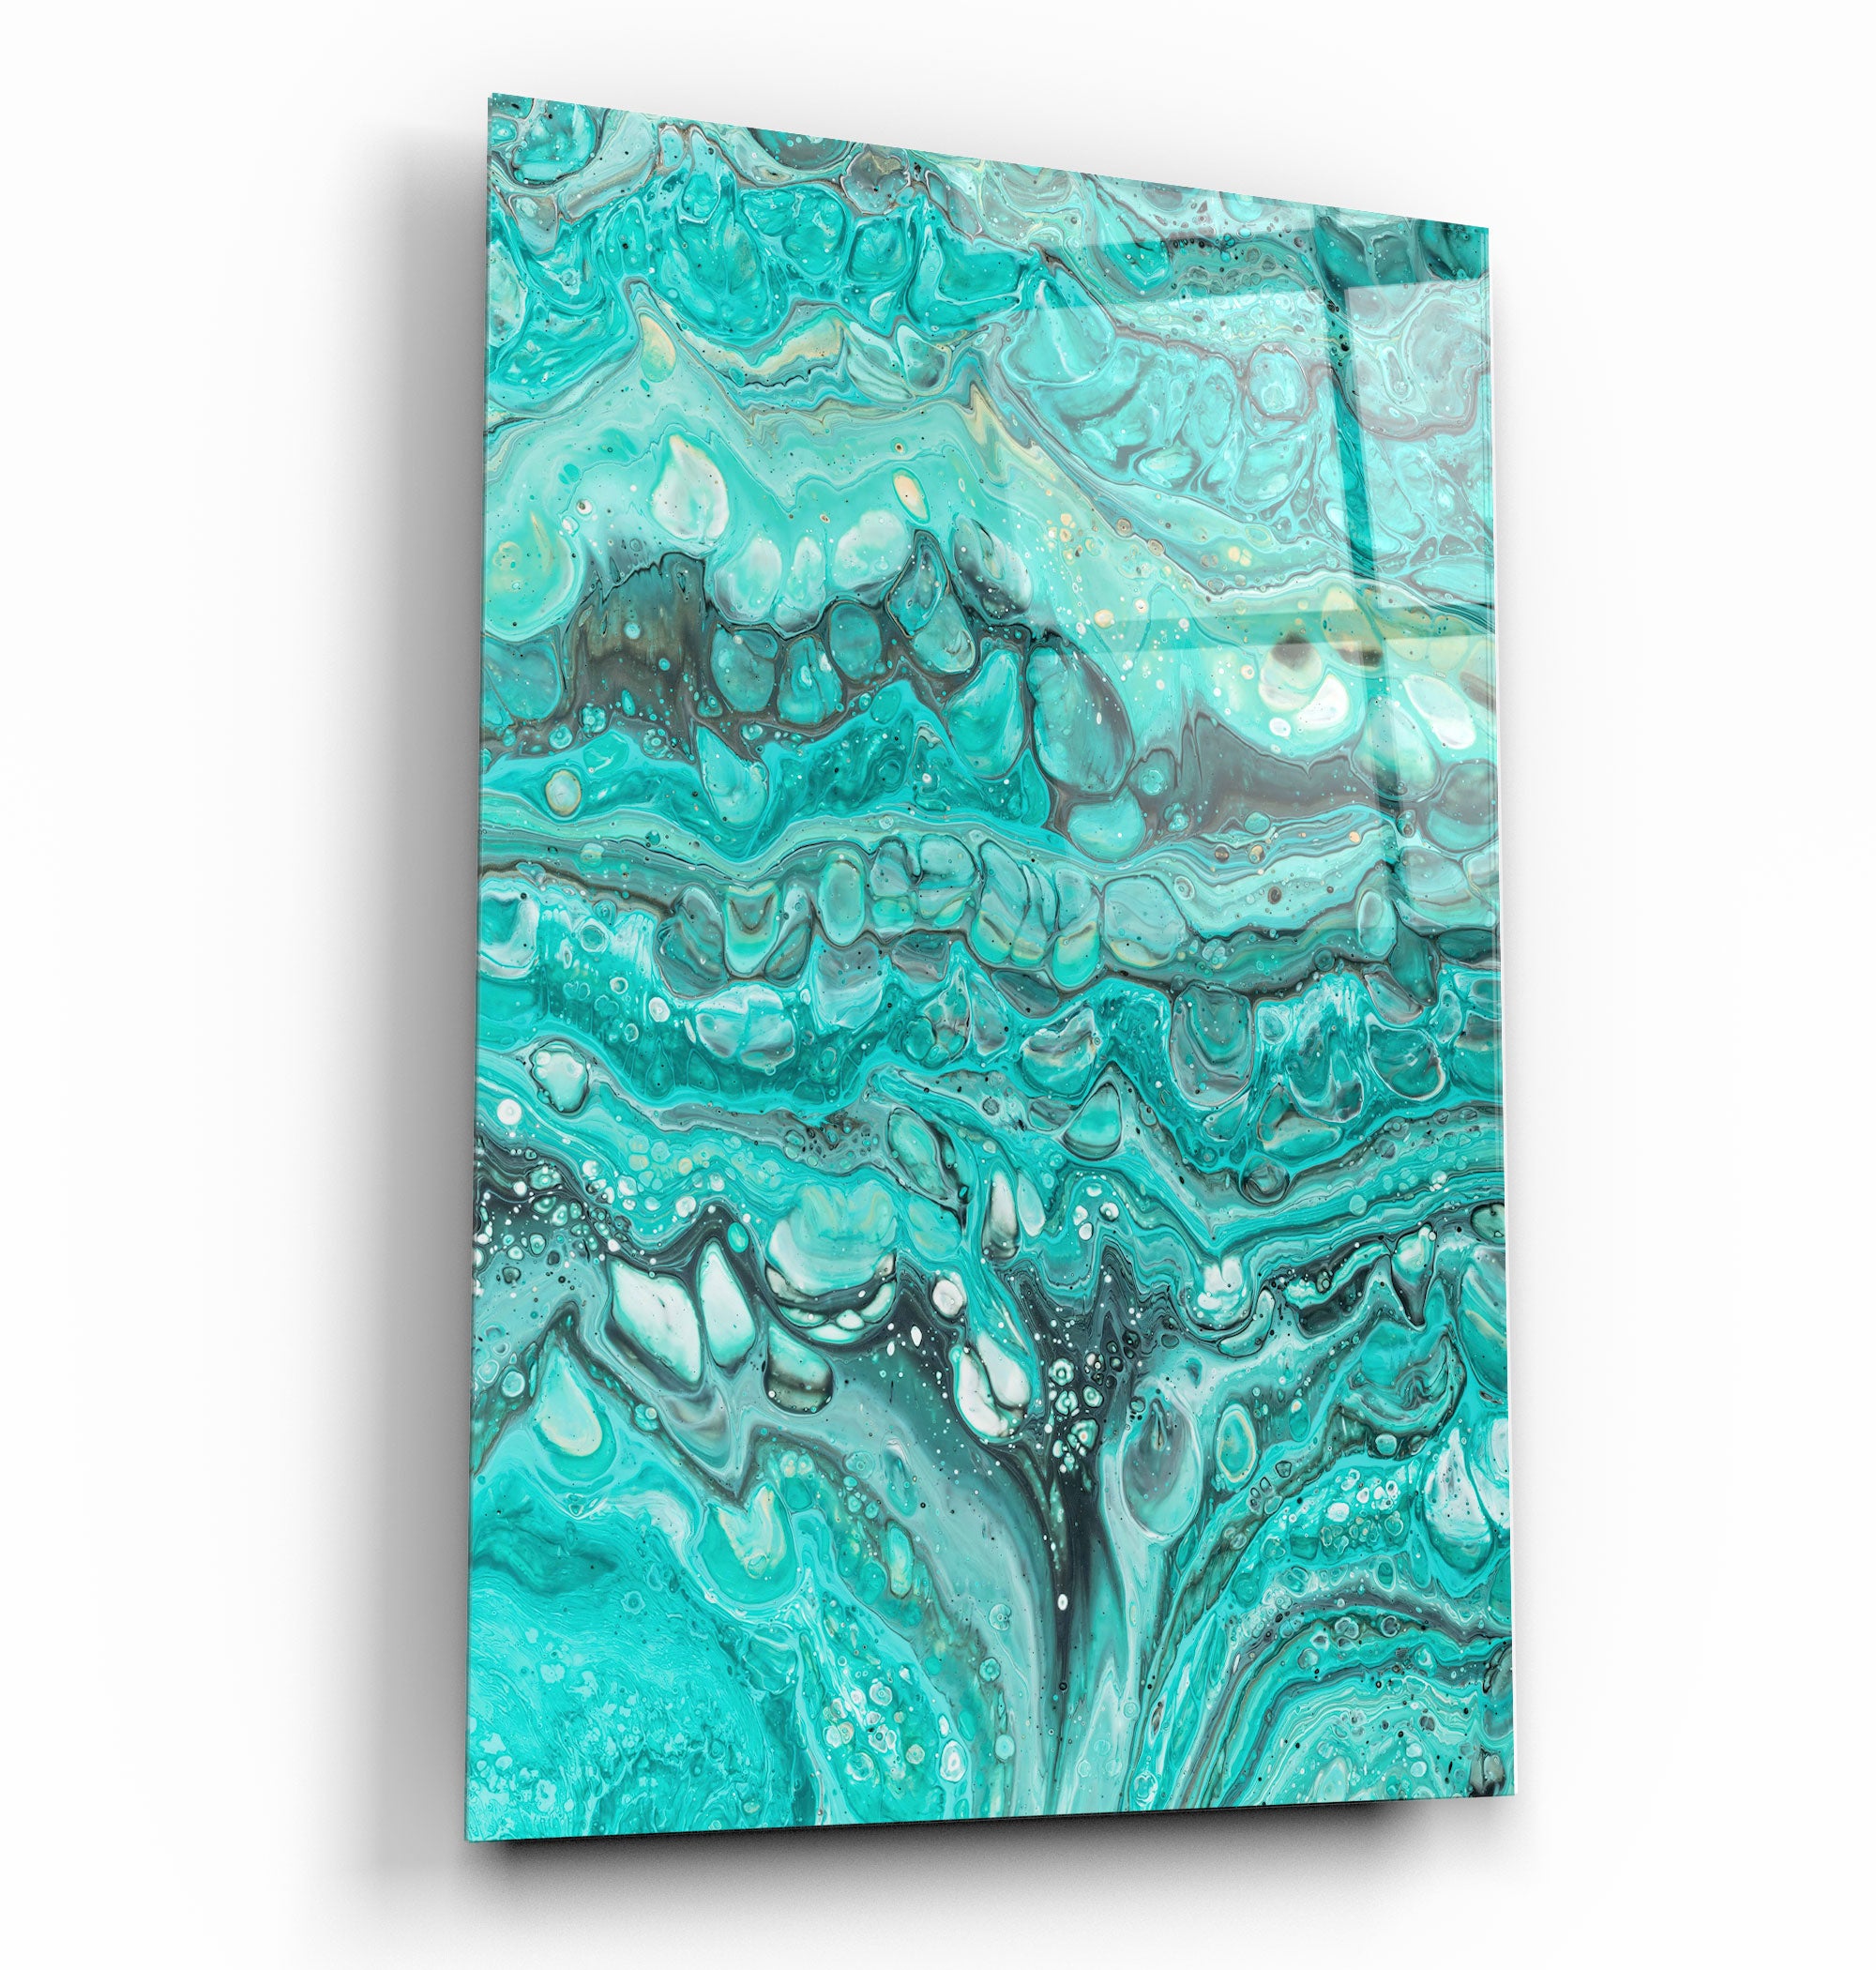 ・"Abstract Turquoise Ink Drops"・Designer's Collection Glass Wall Art